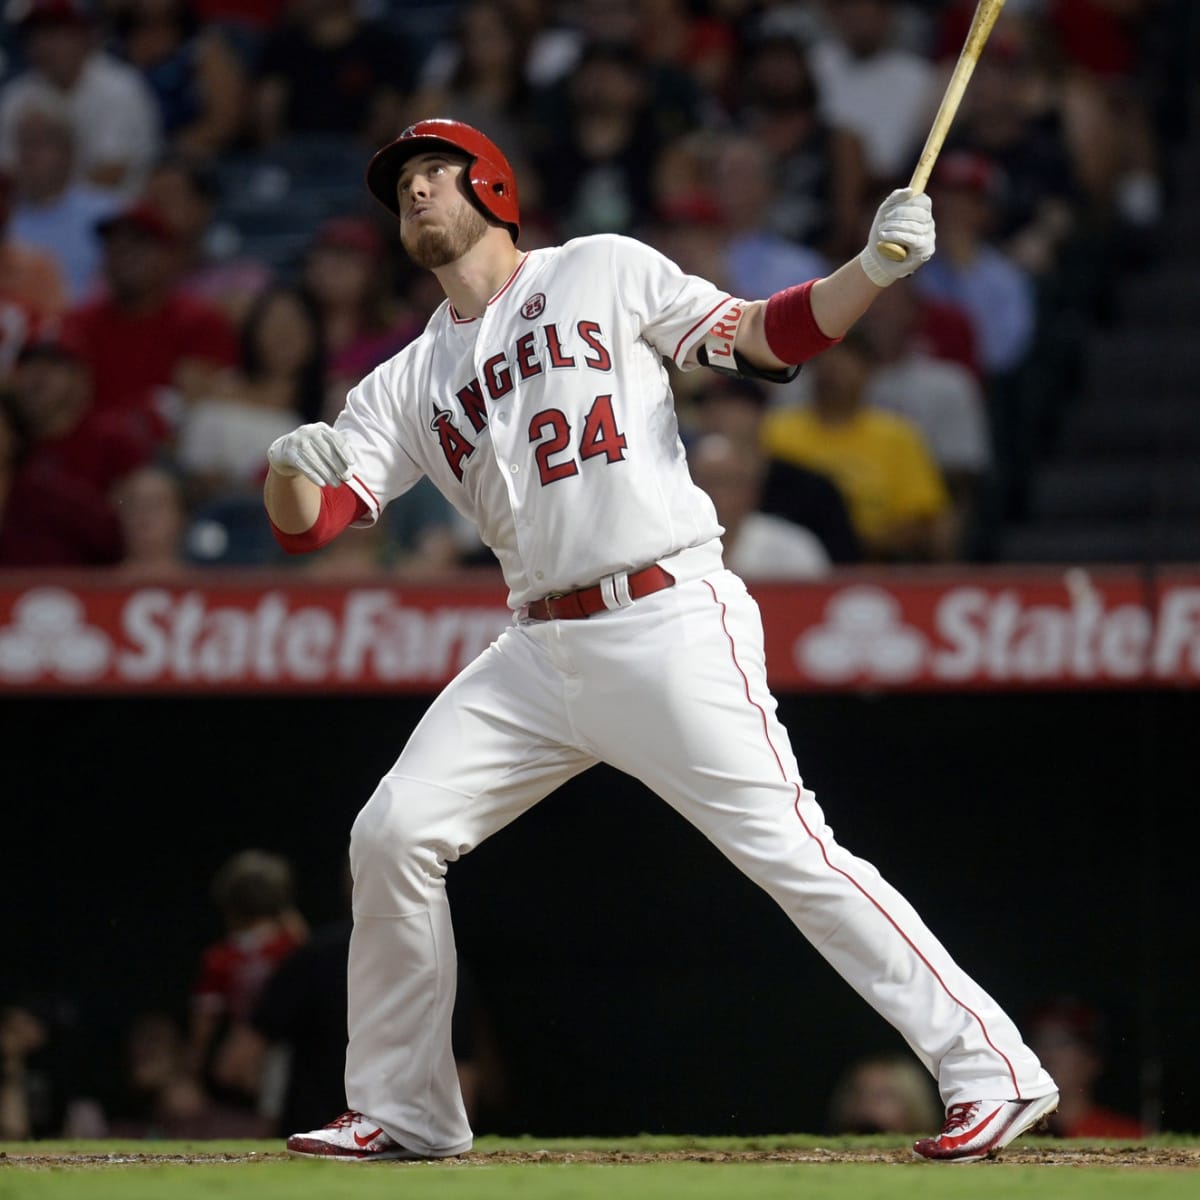 Angels Notes: C.J. Cron looks to find his swing – Orange County Register